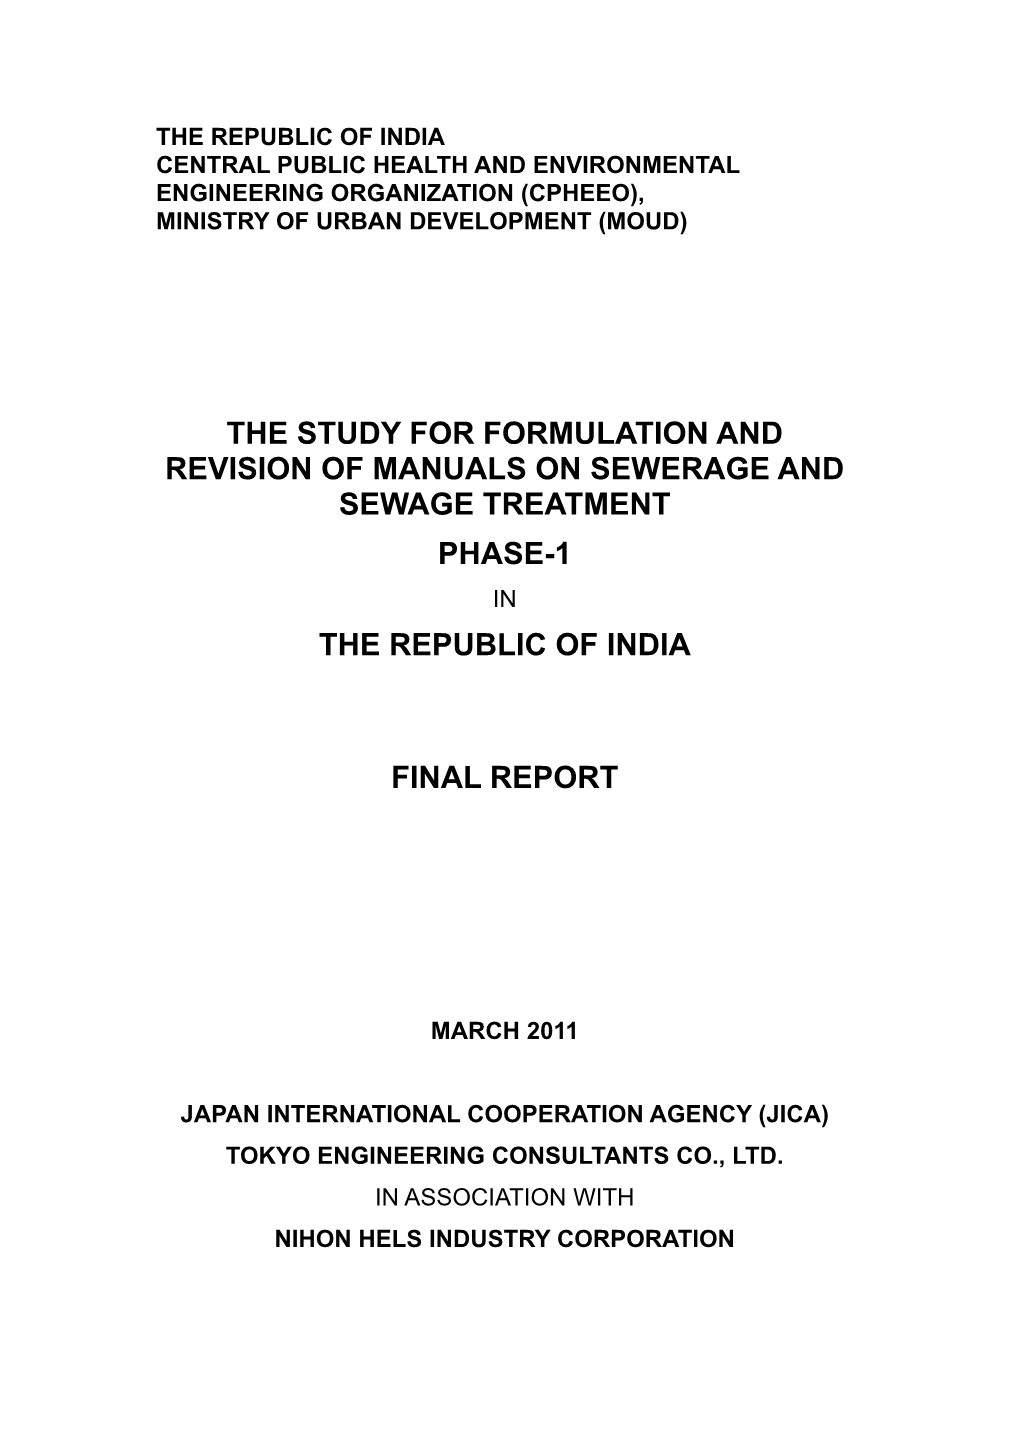 The Study for Formulation and Revision of Manuals on Sewerage and Sewage Treatment Phase-1 in the Republic of India